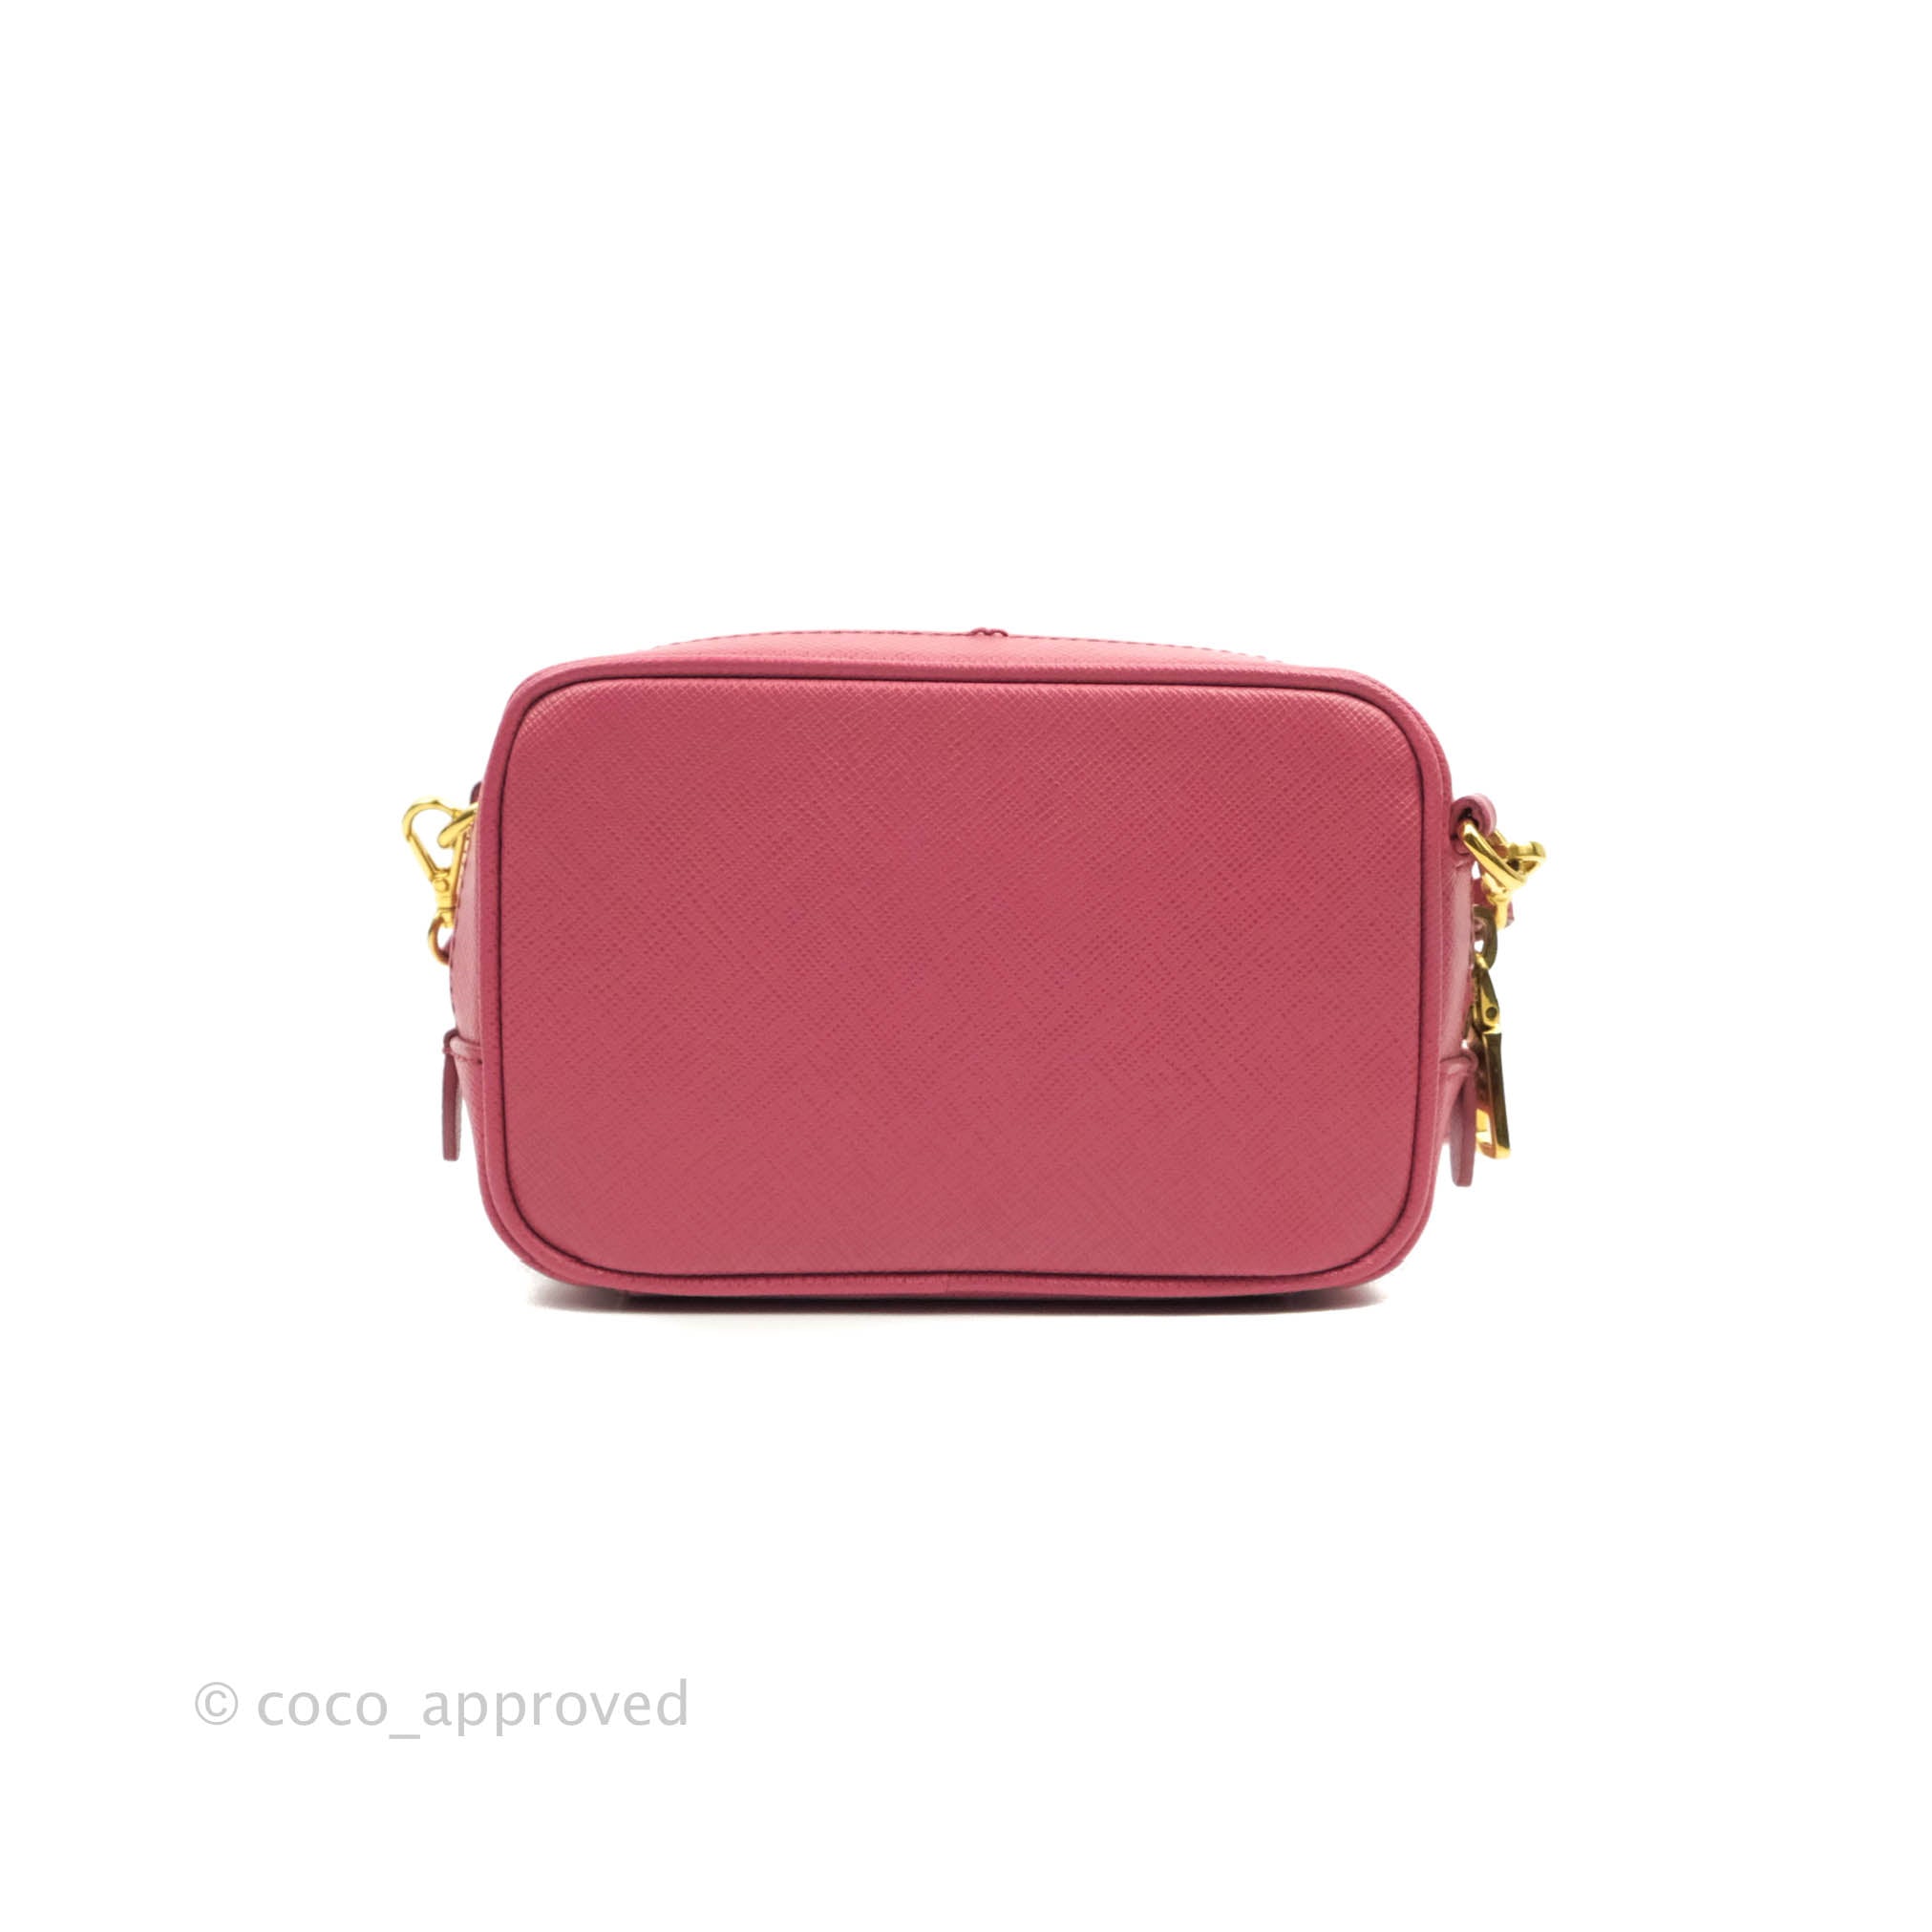 Sold at Auction: Prada Saffiano Pink Mini Leather Zip Up Hand Bag